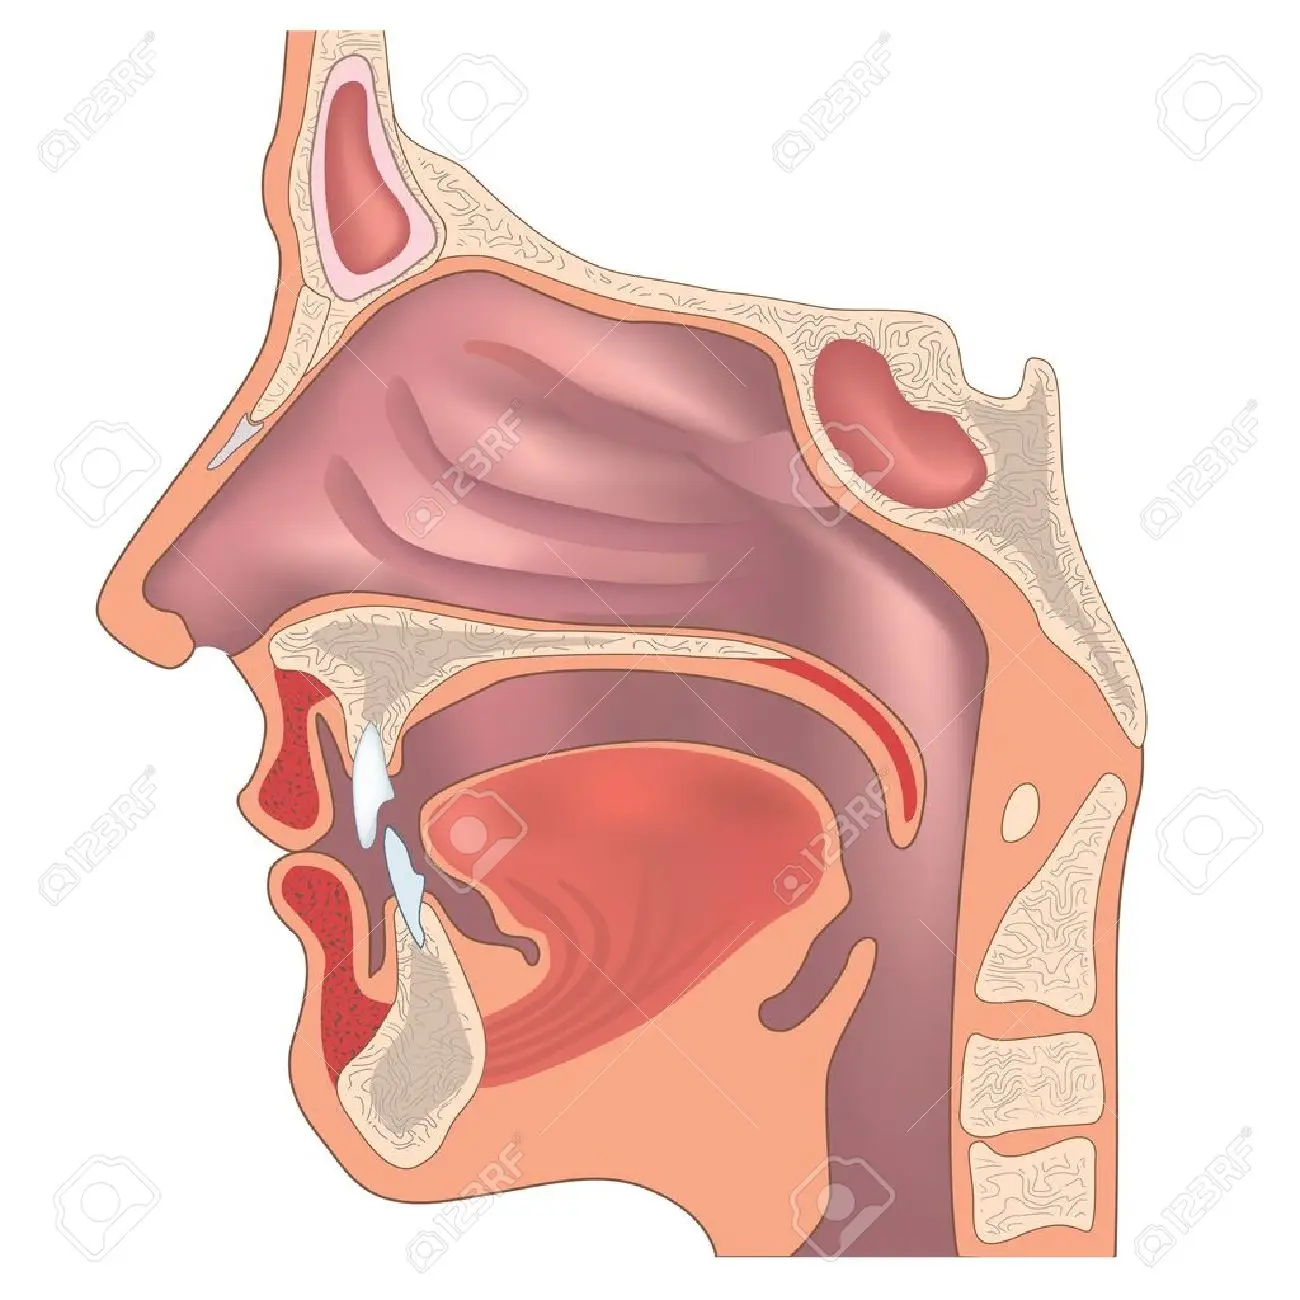 Anatomy of the nose and throat